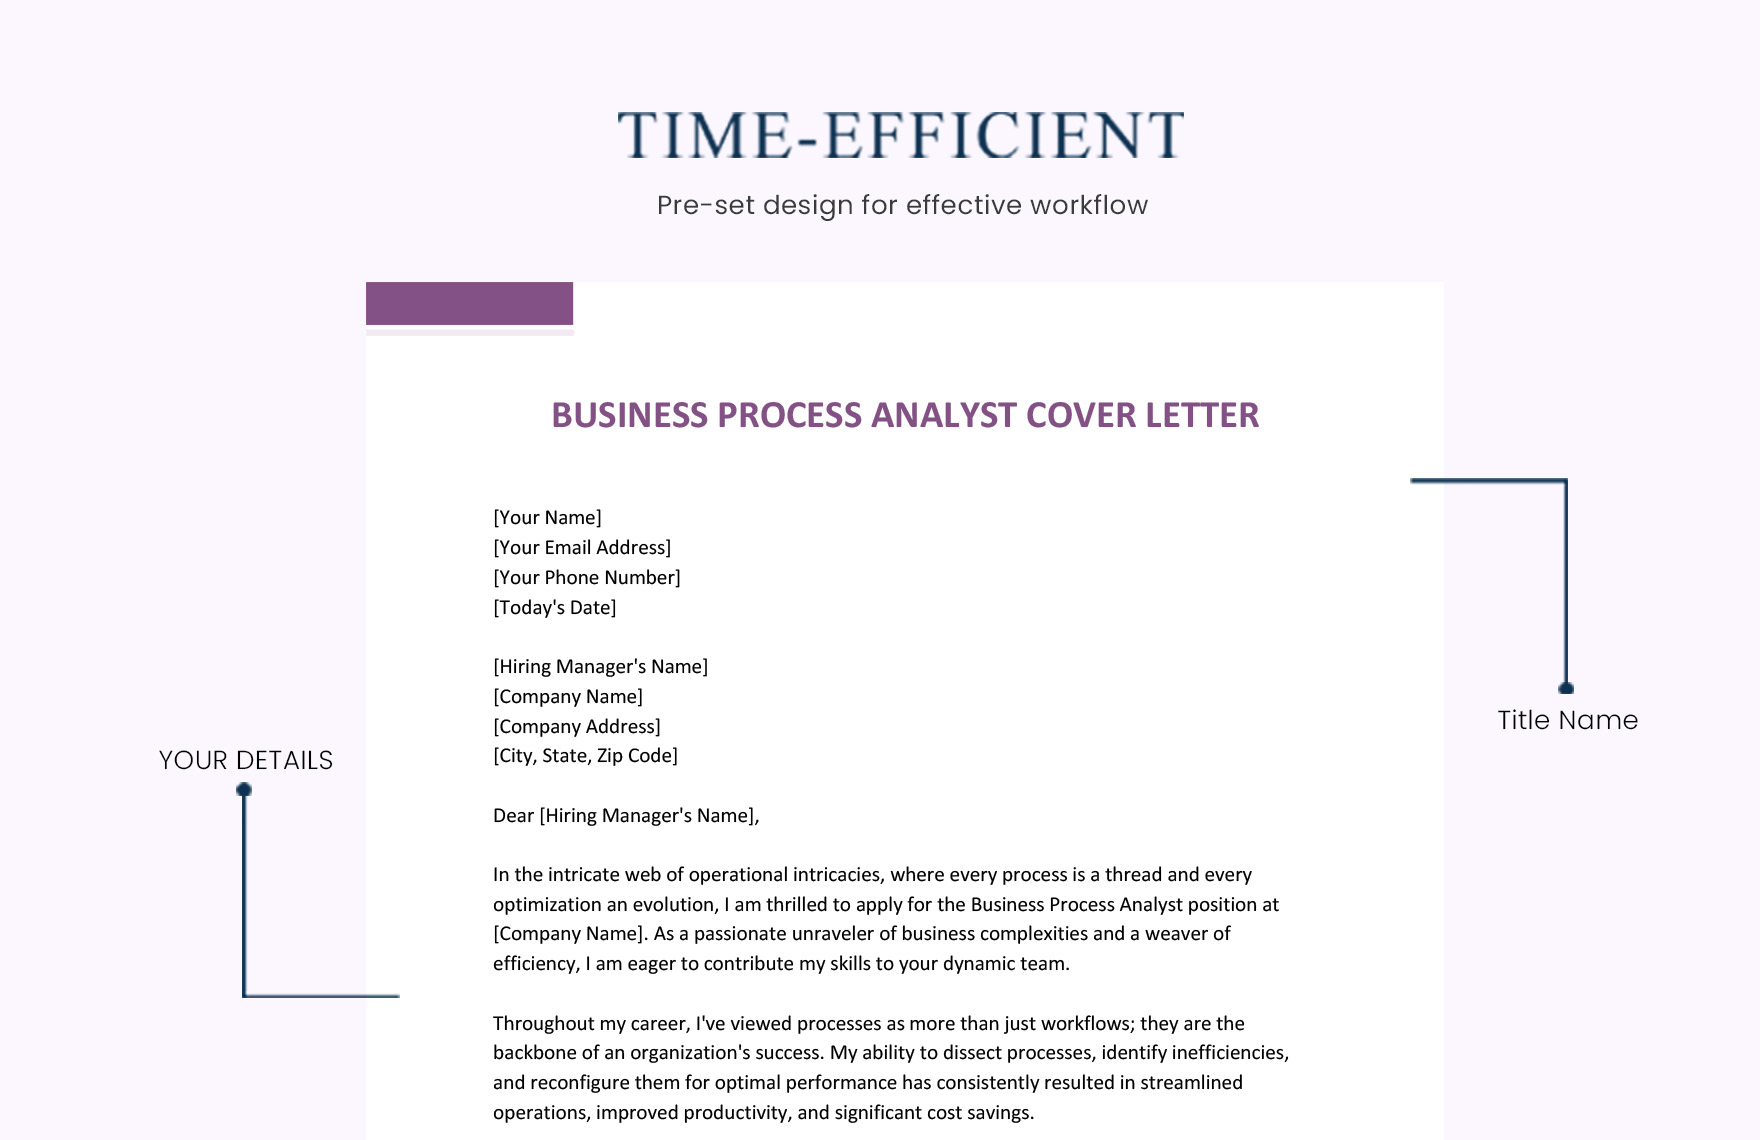 Business Process Analyst Cover Letter